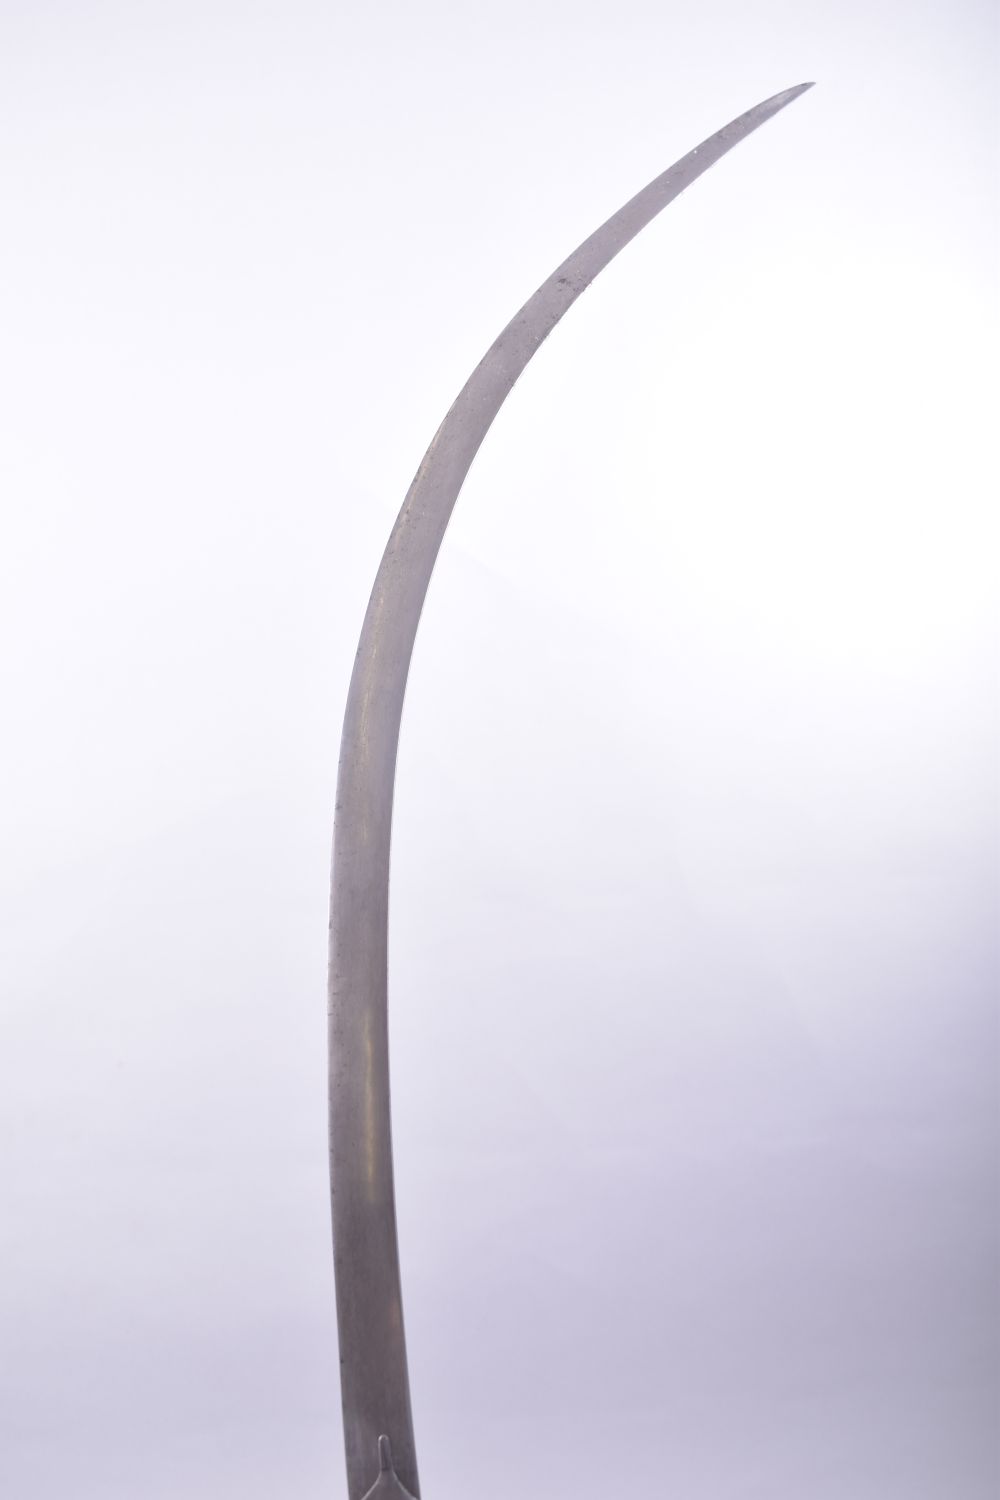 A FINE INDO PERSIAN SHAMSHIR SWORD with watered steel blade and cross guard, with bone handle, - Image 4 of 6